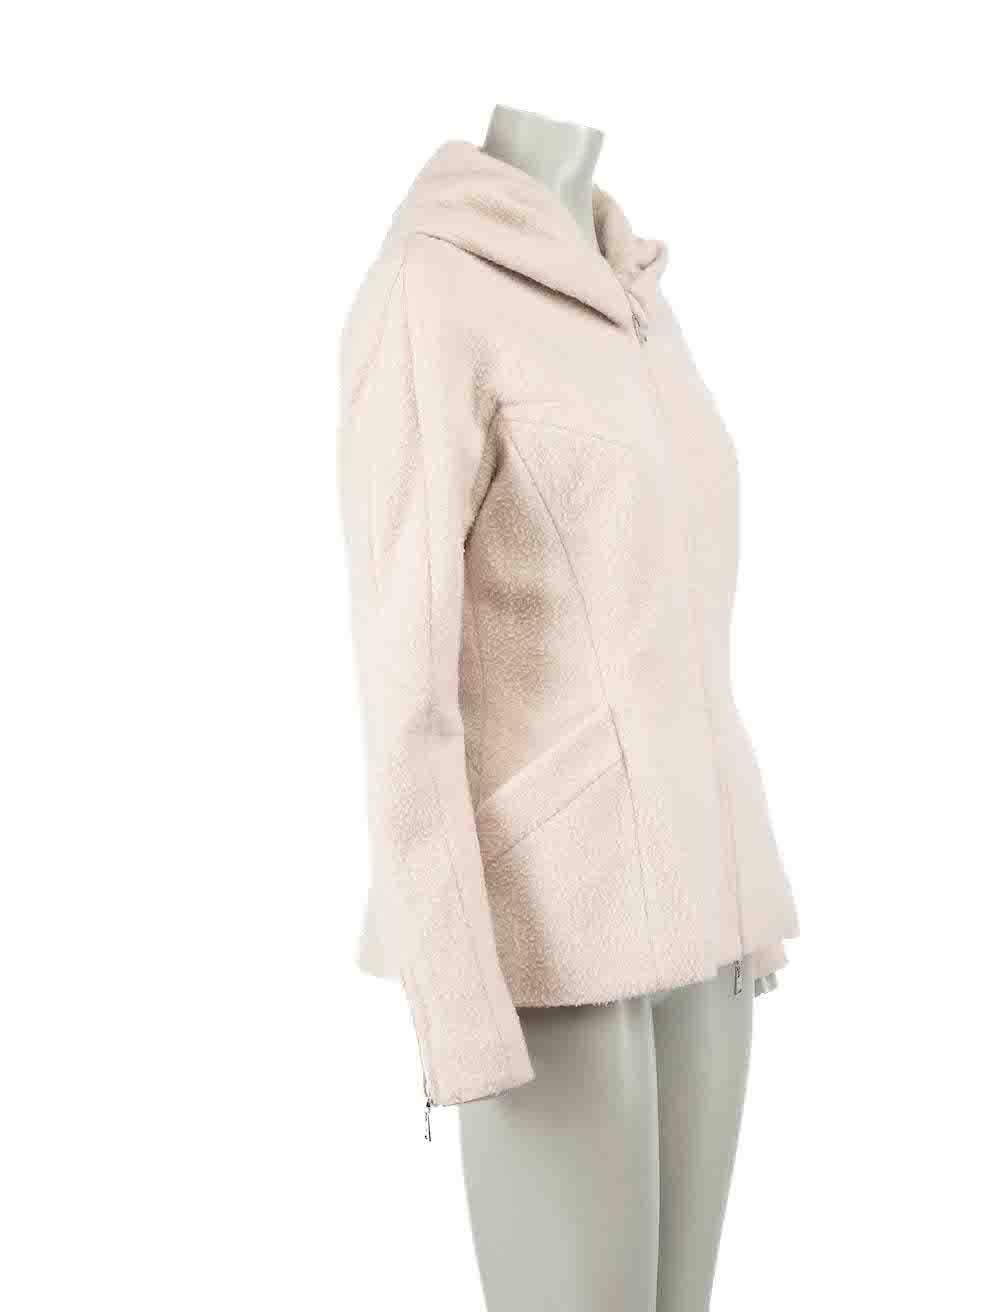 CONDITION is Very good. Minimal wear to jacket is evident. Minimal wear to right side lining with discolouration on this used Louis Vuitton designer resale item. Please note that this texture is deliberate.
 
 Details
 Beige
 Wool
 Jacket
 Zip